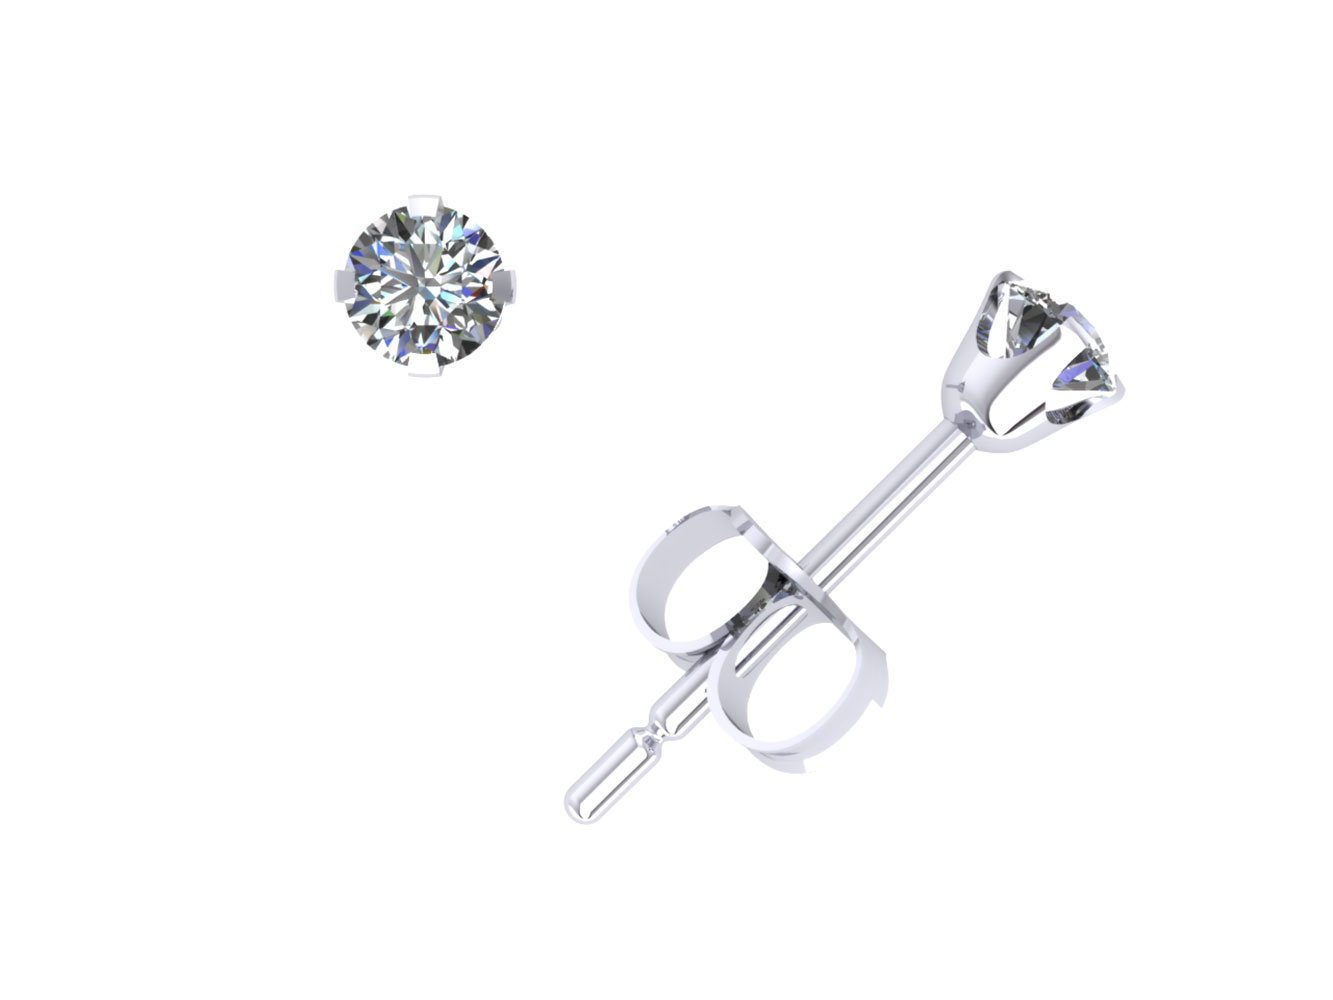 Jewel We Sell Genuine 0.15Ct Round Cut Diamond Stud Earrings 18k White or Yellow Gold Setting Push Back H SI2